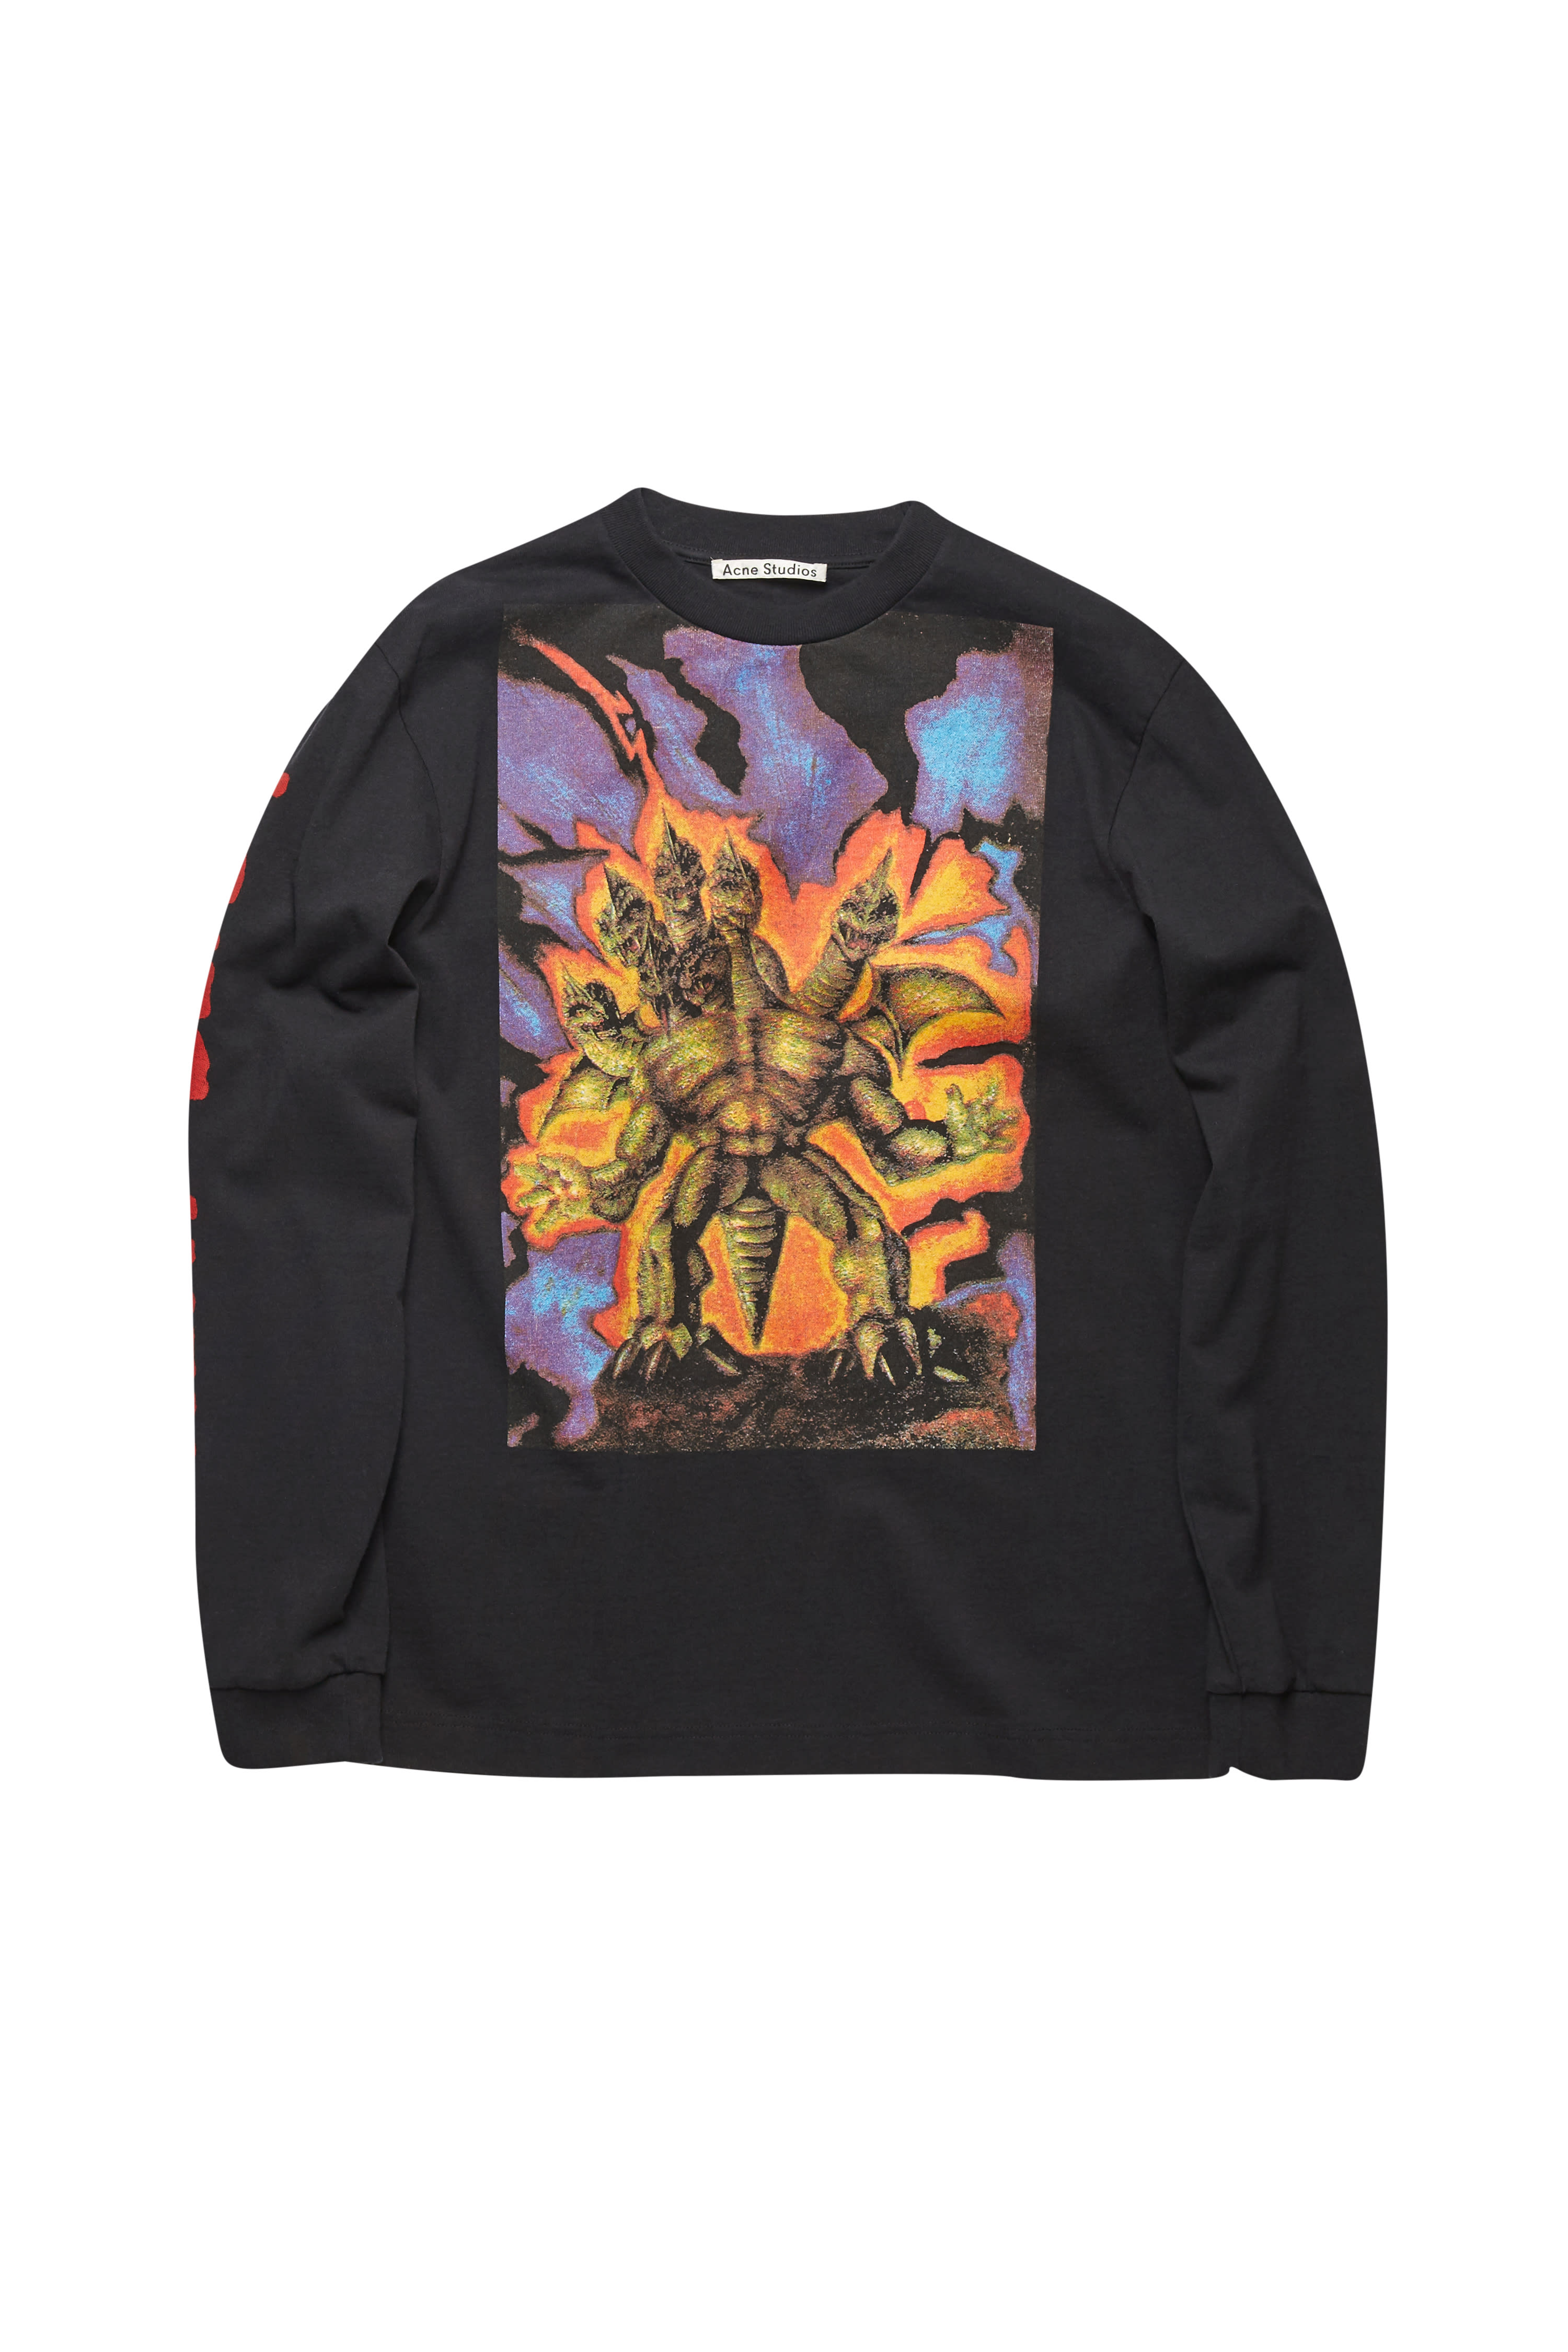 Complex Best Style Releases Acne Studios Monster In My Pocket Crewneck